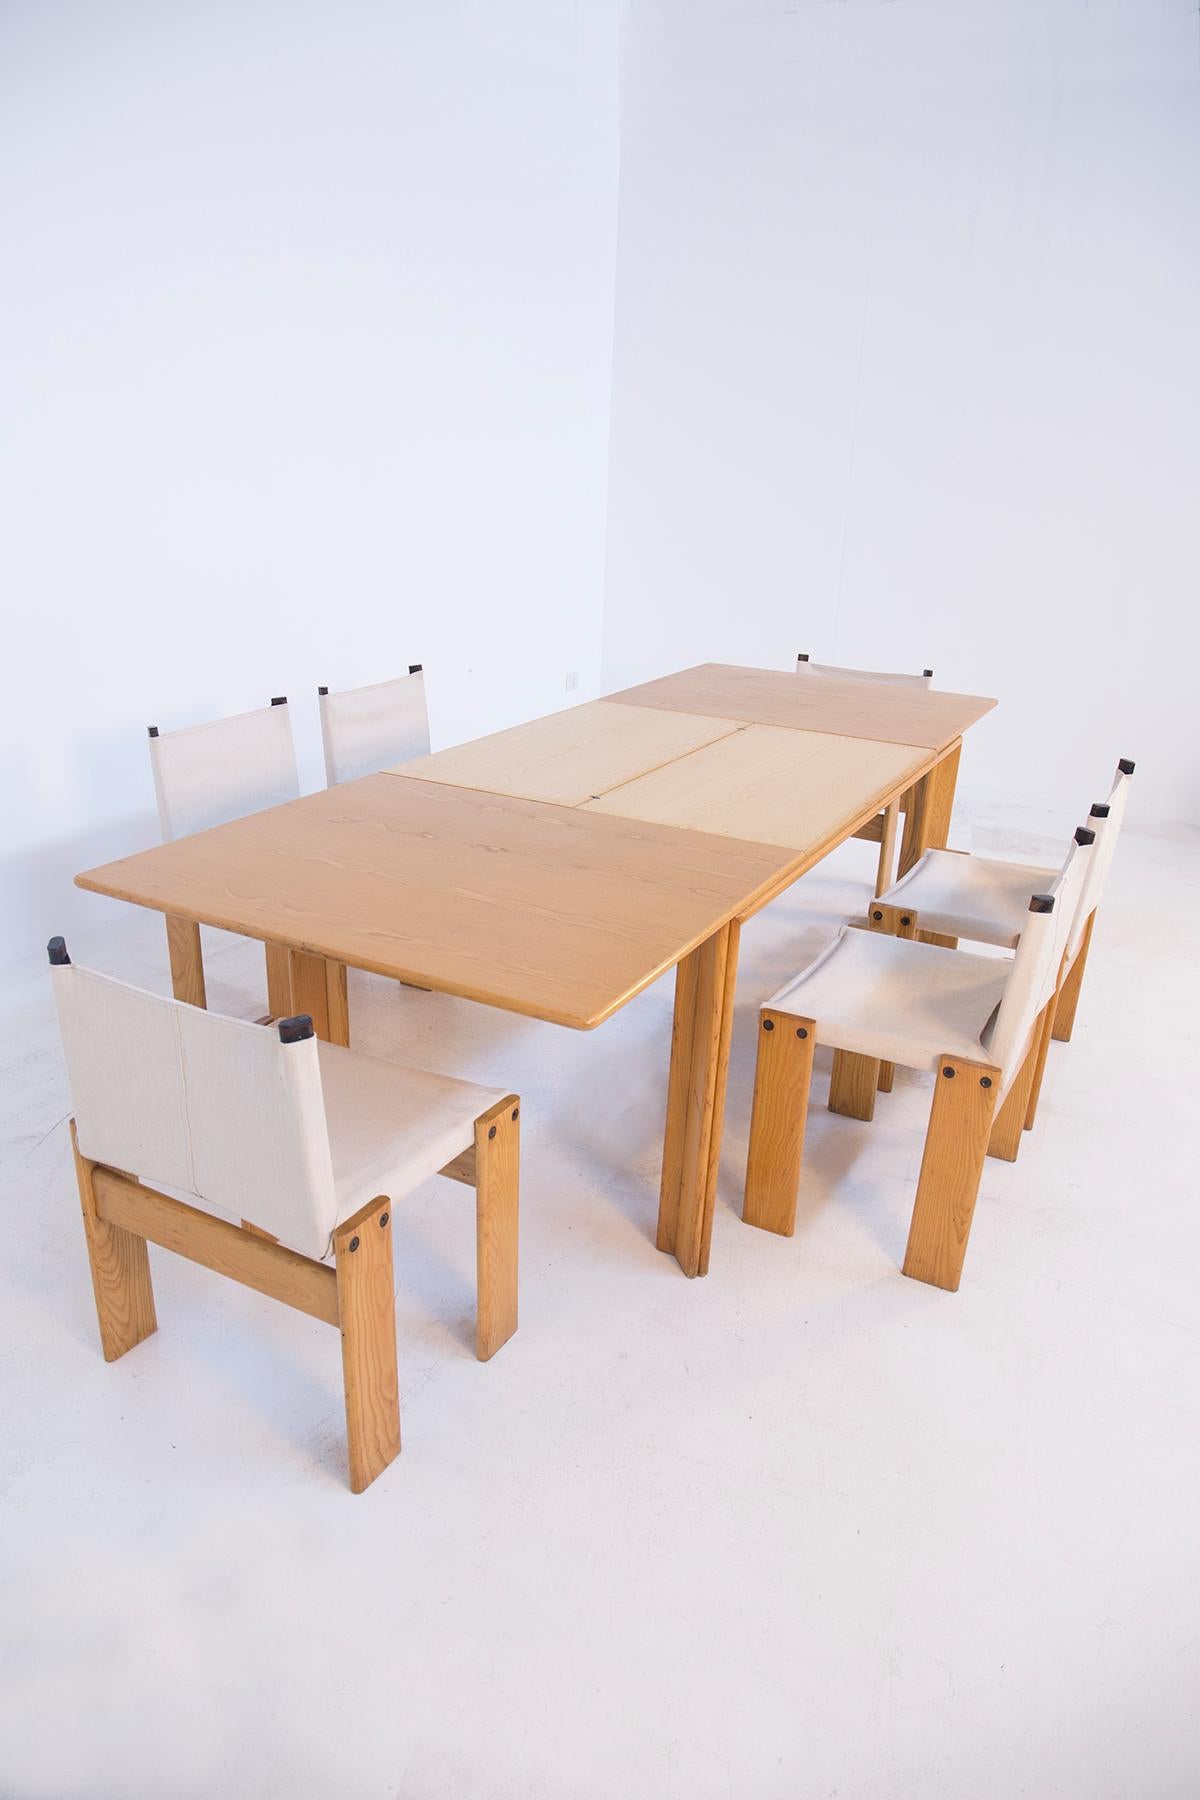 Extendable dining table by Afra & Tobia Scarpa model Monk in beechwood. The table by means of its mechanism allows the two sides of the wooden top to be extended, where inside there are two other pull-out shelves that allow the table to be extended.